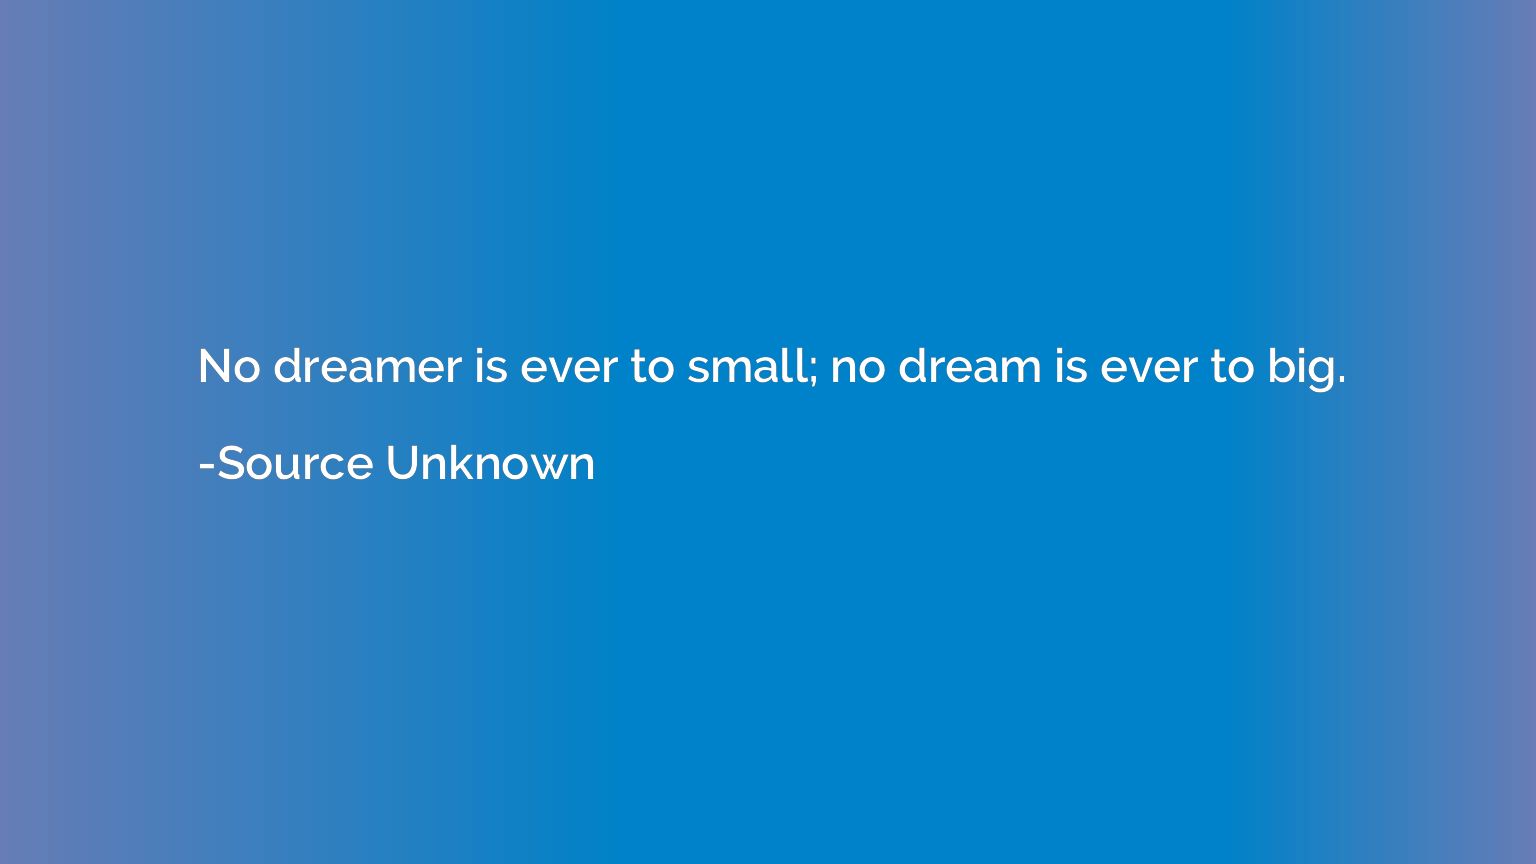 No dreamer is ever to small; no dream is ever to big.